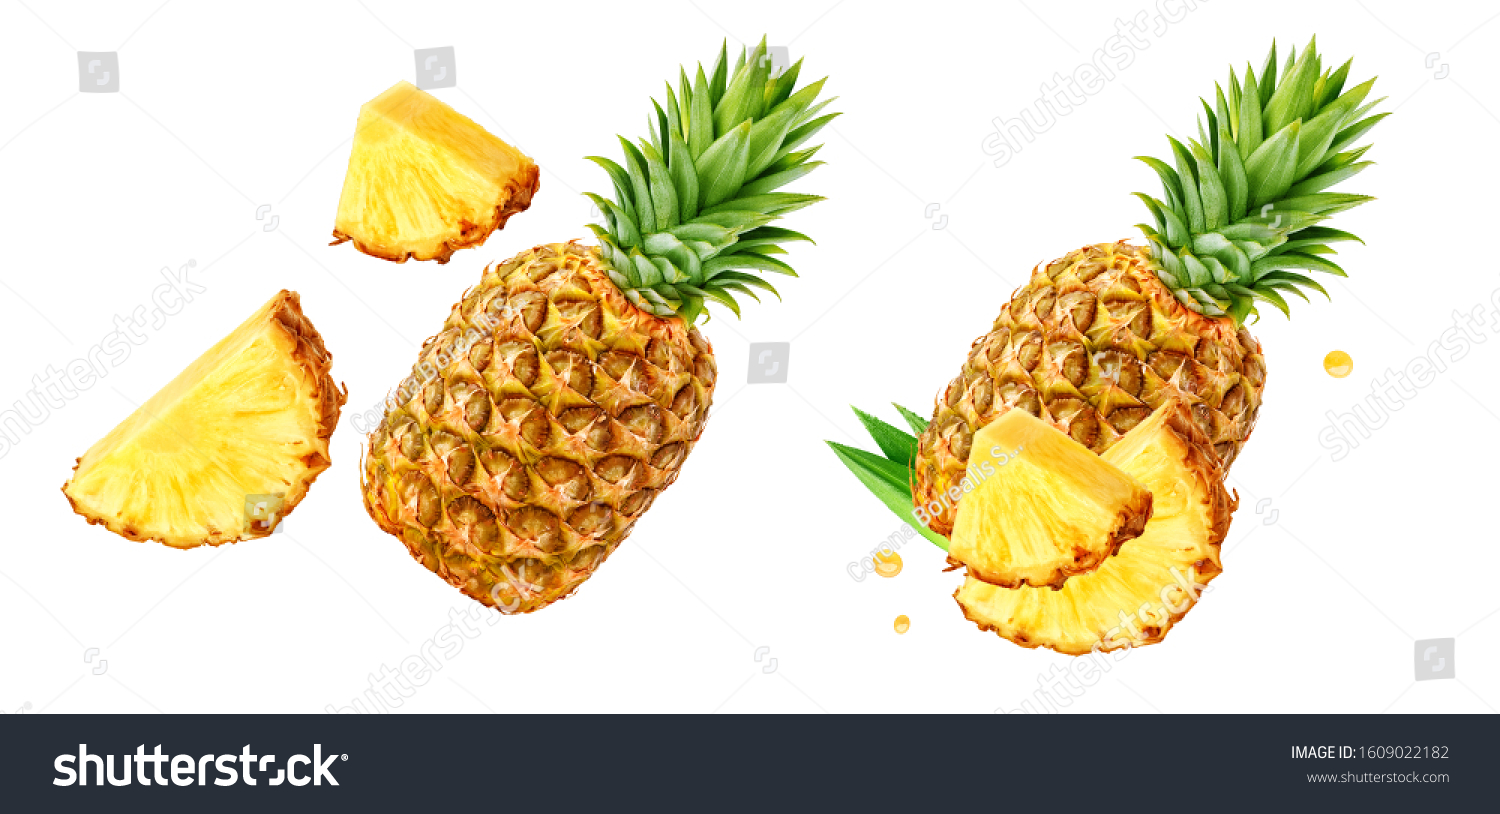 Fresh ripe pineapple fruit, pineapple fruit slices isolated. Juicy fruit design elements composition with focus stacking, white background. Tasty raw whole tropical fruit, healthy nutrition concept #1609022182